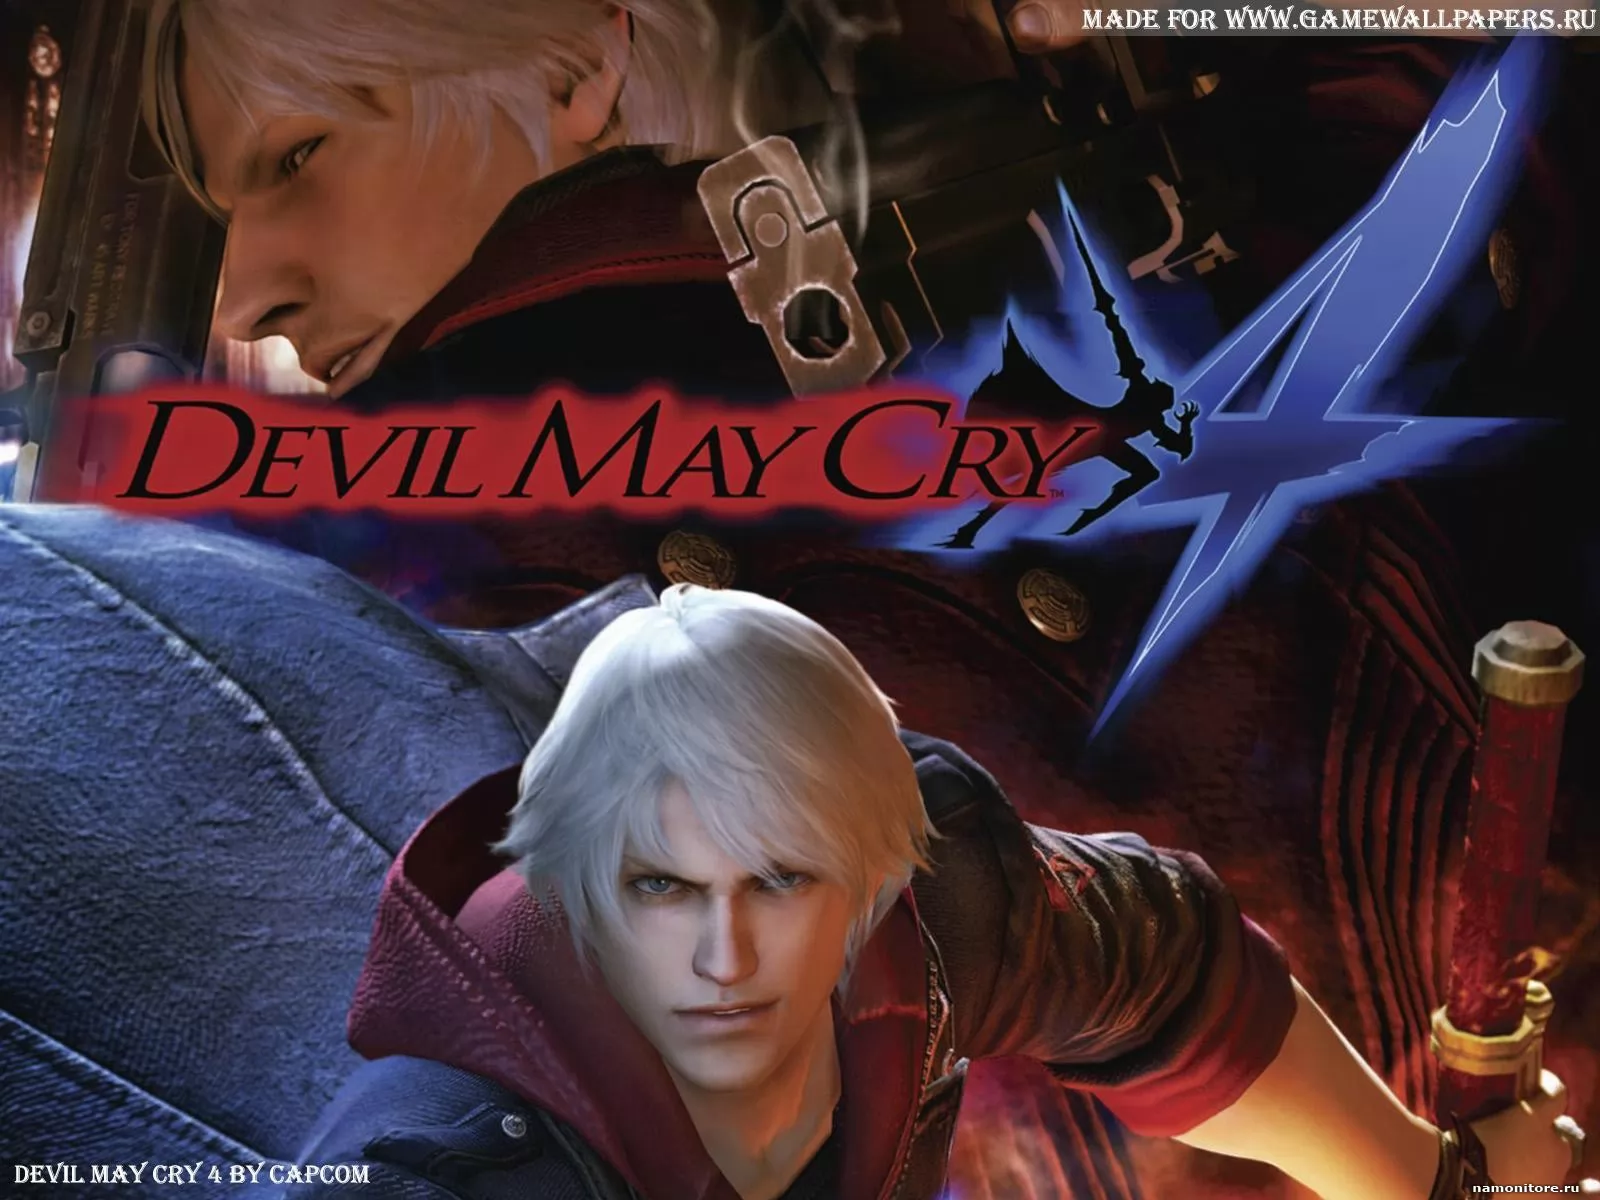 Devil May Cry 4, ,   